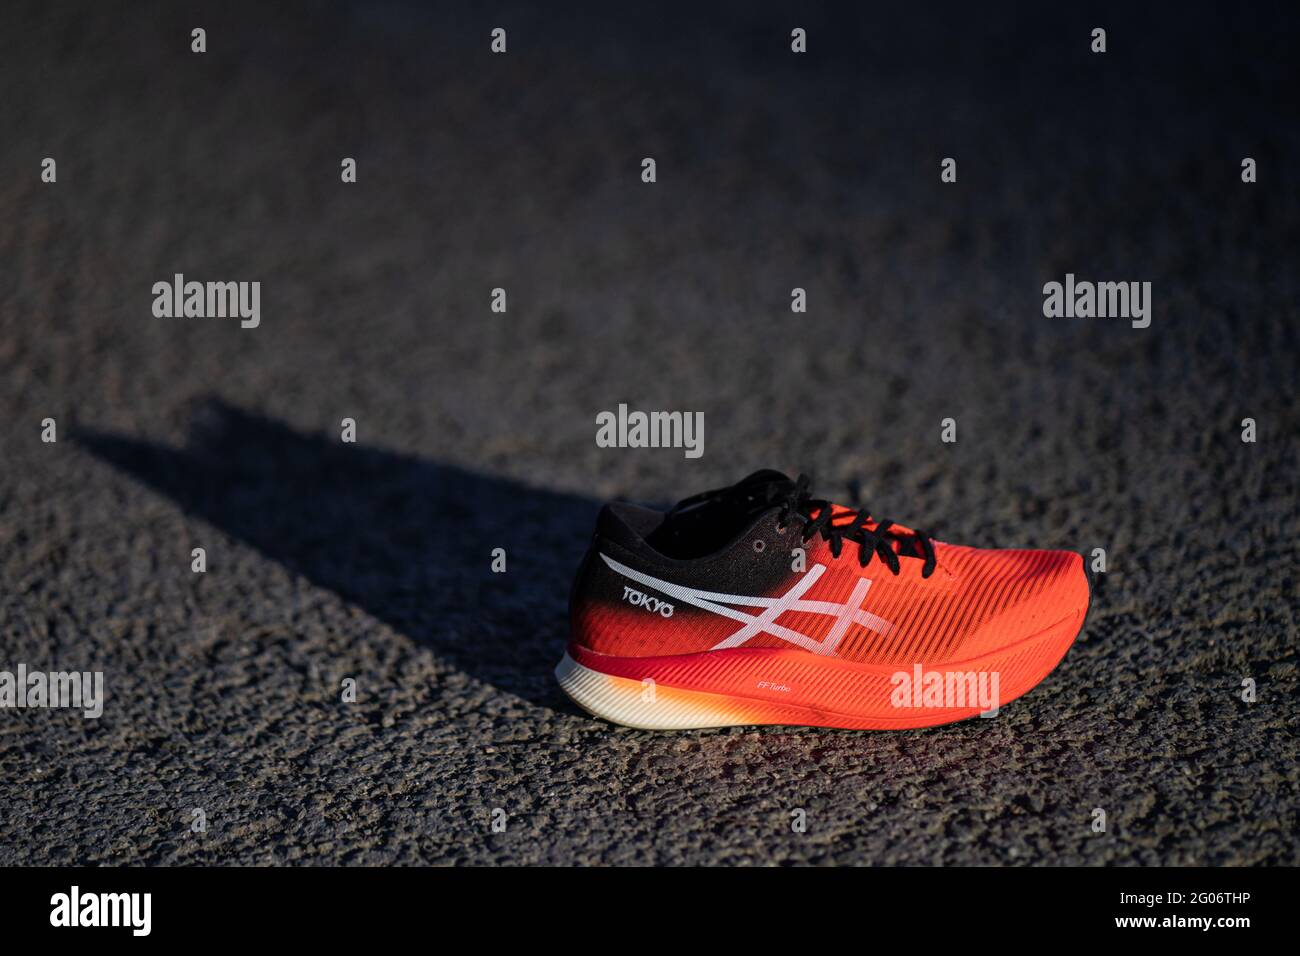 Asics Metaspeed Sky Tokyo shoe. Very fast shoe with carbon plate and  created for the Tokyo 2020 Olympic Games Stock Photo - Alamy